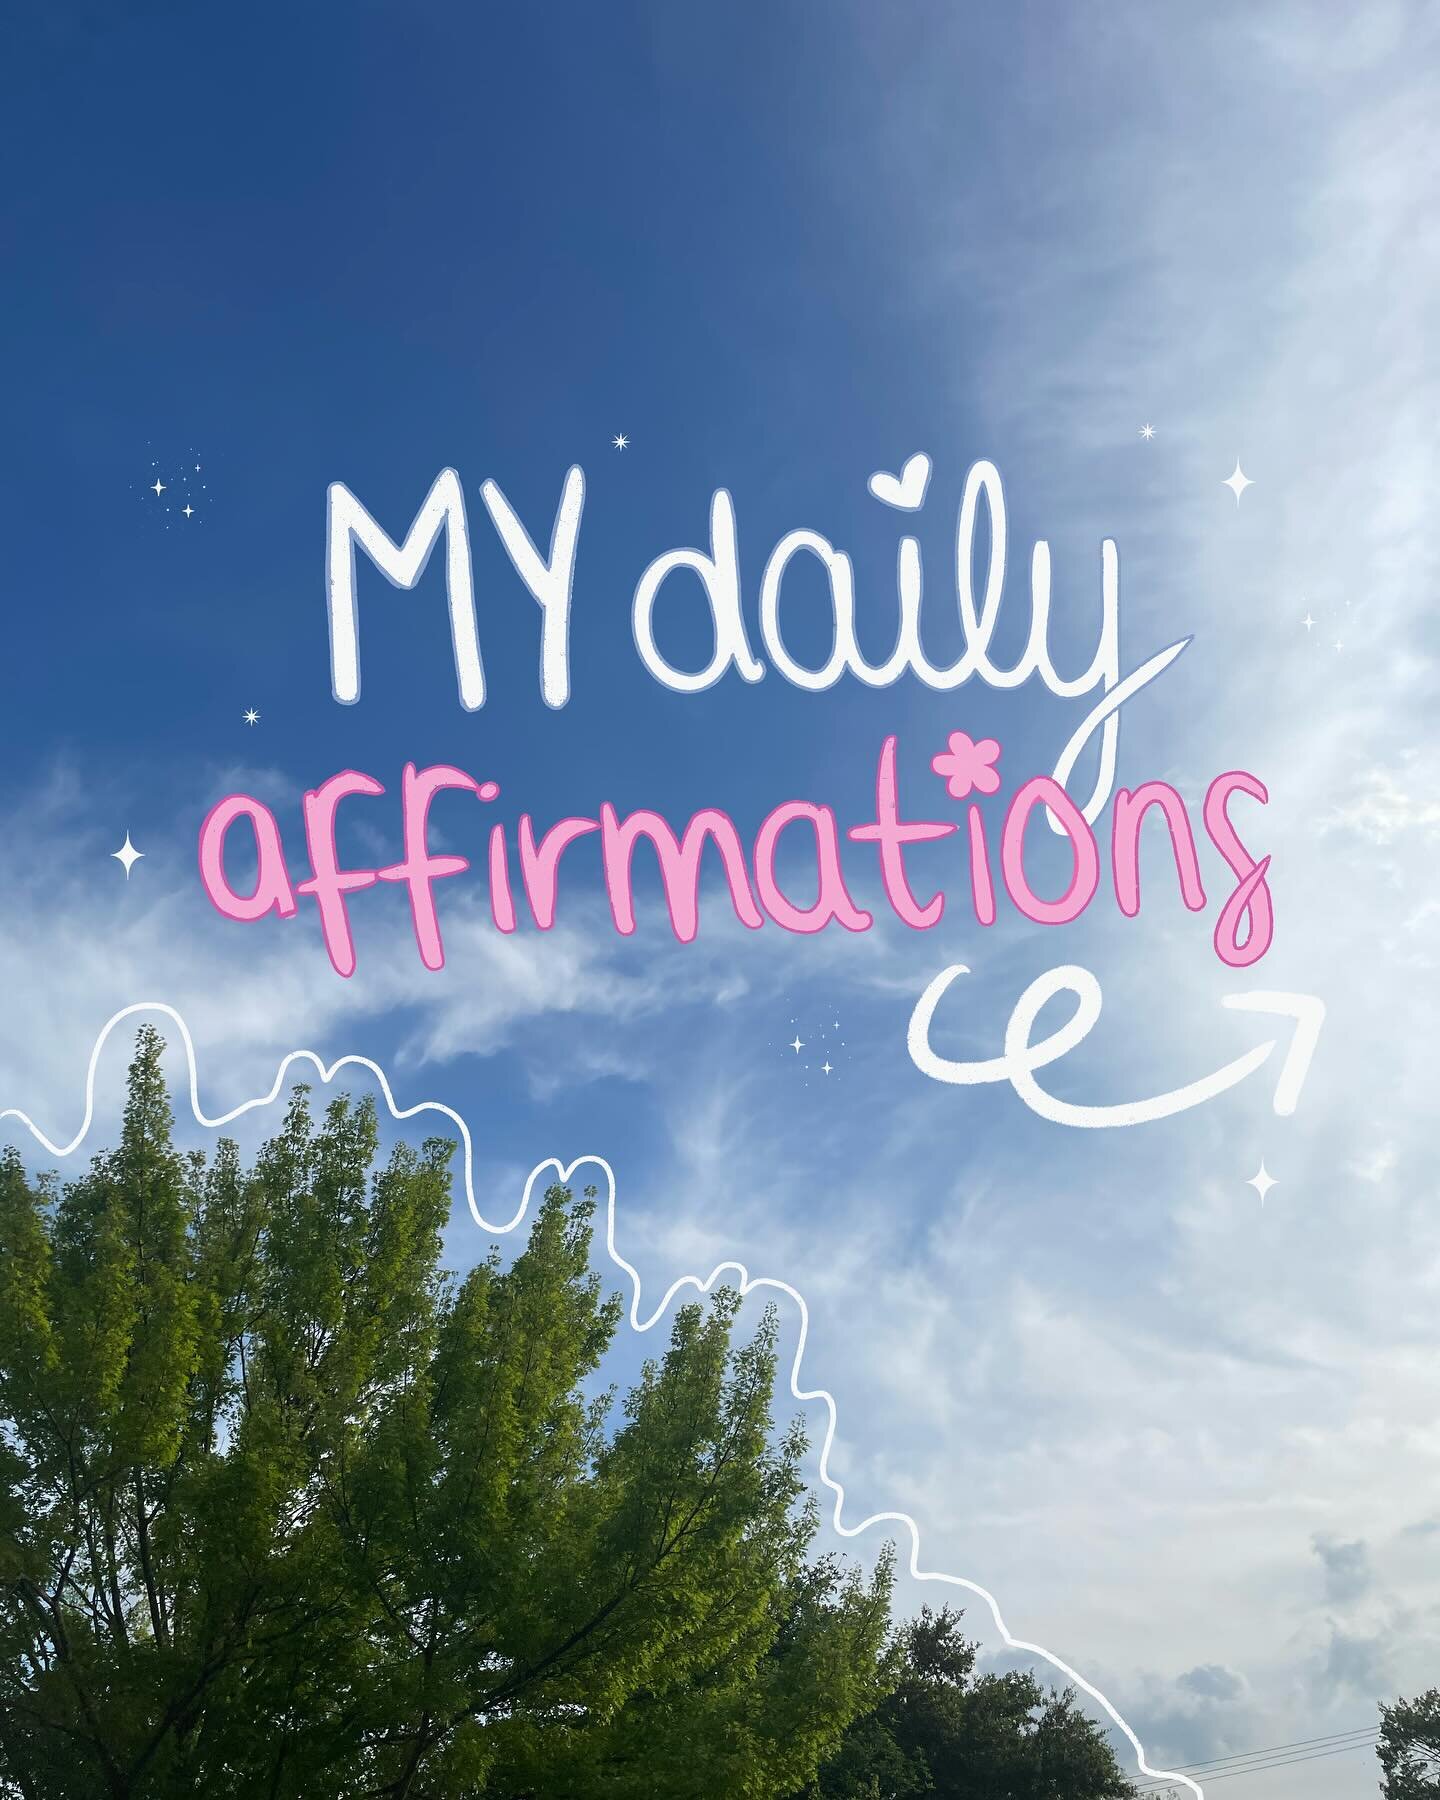 📣NORMALIZE SPEAKING KINDLY TO YOURSELF📣

If I had to narrow it down to ~5 affirmations, these are IT for me These affirmations are the backbone of my day🌸✨📝

Immediately after I open my eyes (and still in bed) I play my
&ldquo;affirmations&rdquo;